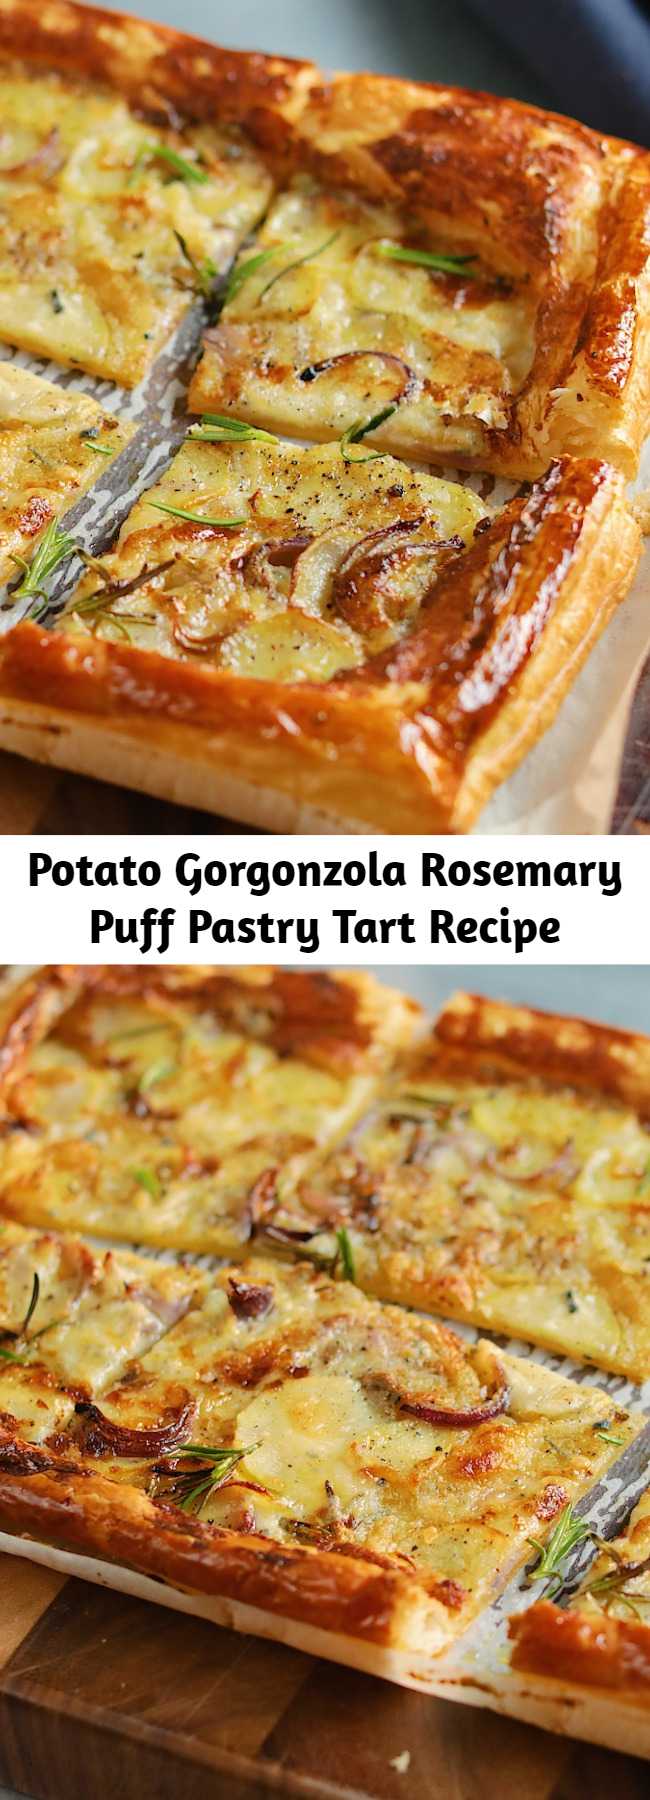 Potato Gorgonzola Rosemary Puff Pastry Tart Recipe - Your weeknight dinners just got a whole lot more exciting.